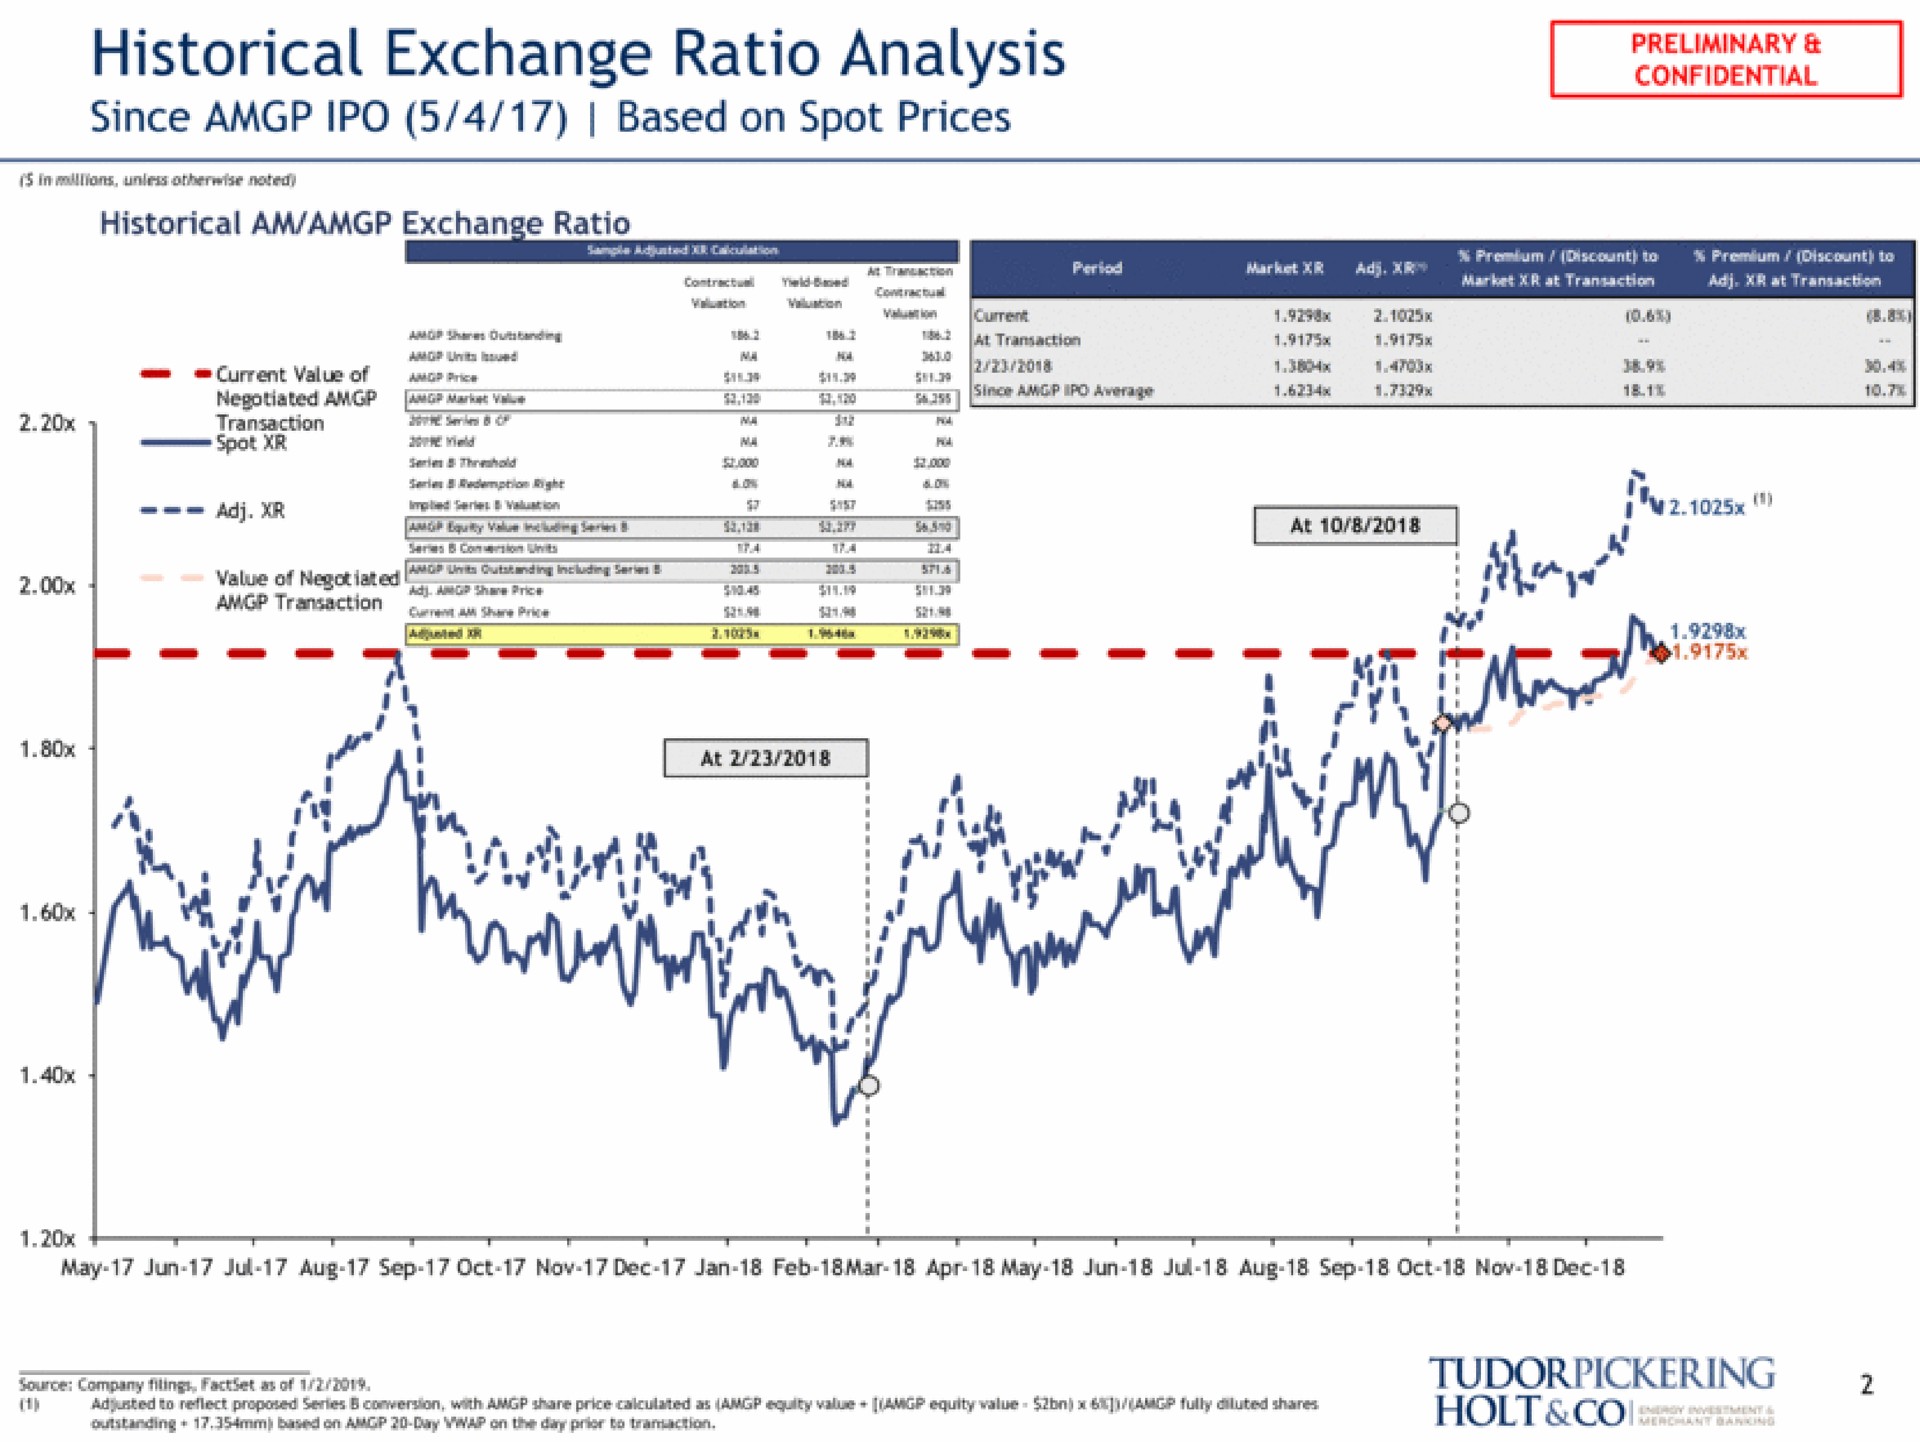 historical exchange ratio analysis since based on spot prices an me i a wah source company wings an of | Tudor, Pickering, Holt & Co